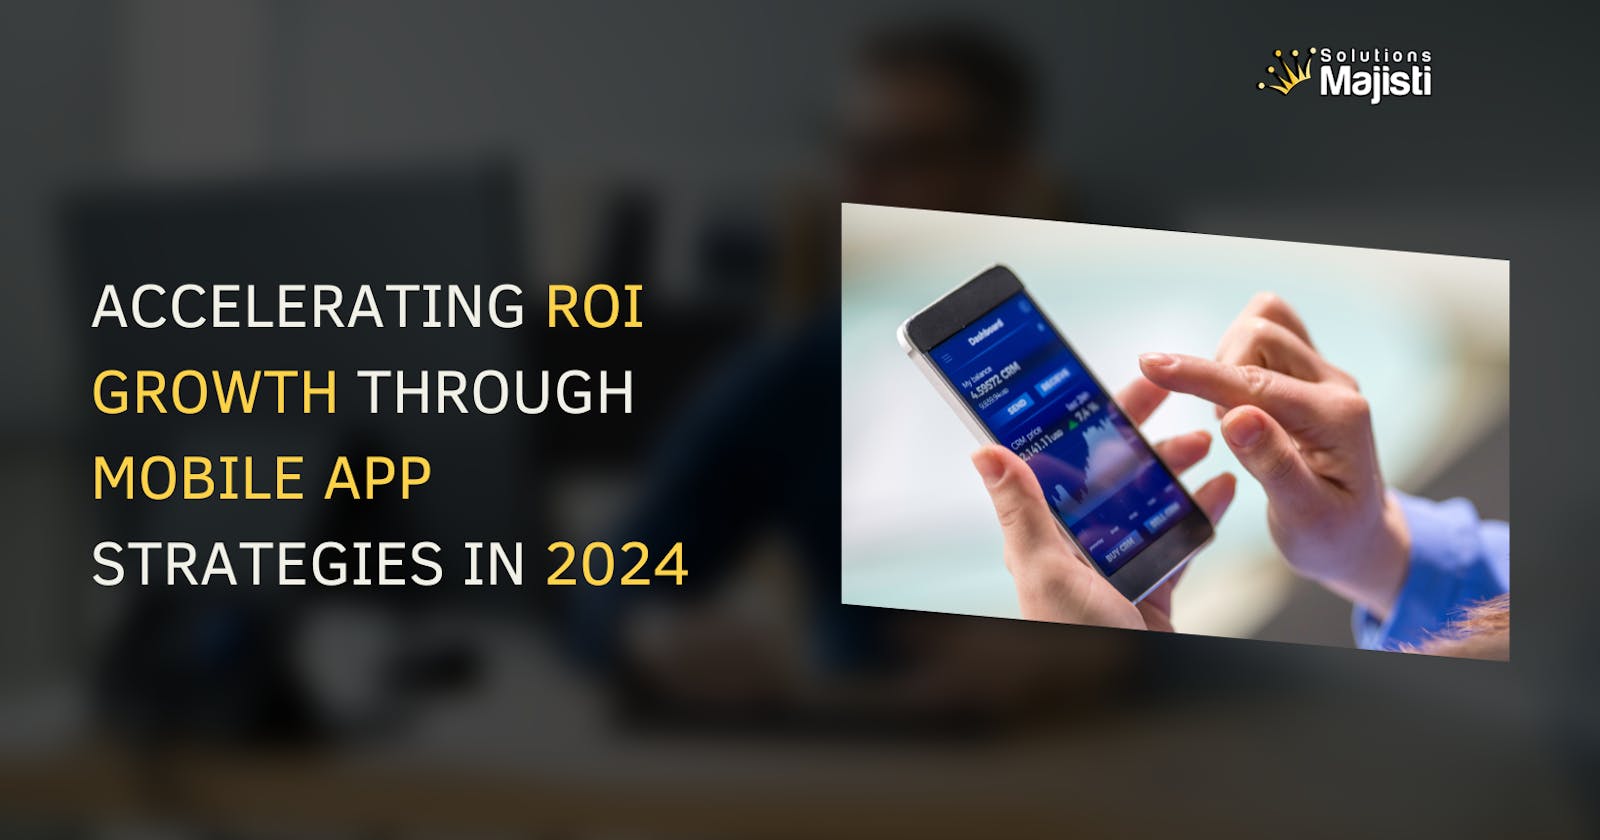 Supercharge Your App ROI: 6 Winning Tactics for 2024